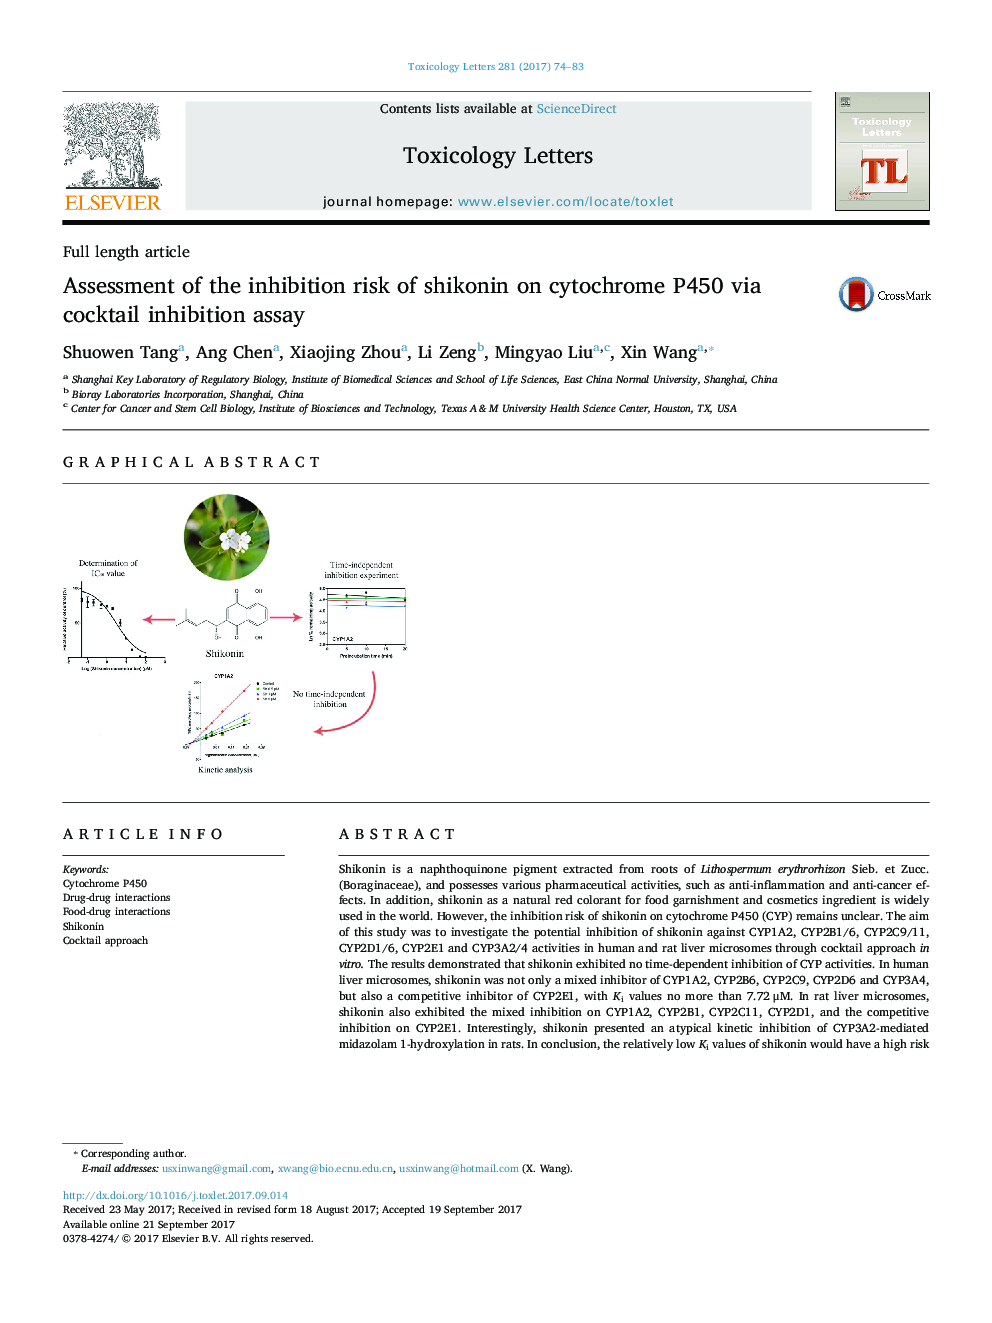 Assessment of the inhibition risk of shikonin on cytochrome P450 via cocktail inhibition assay